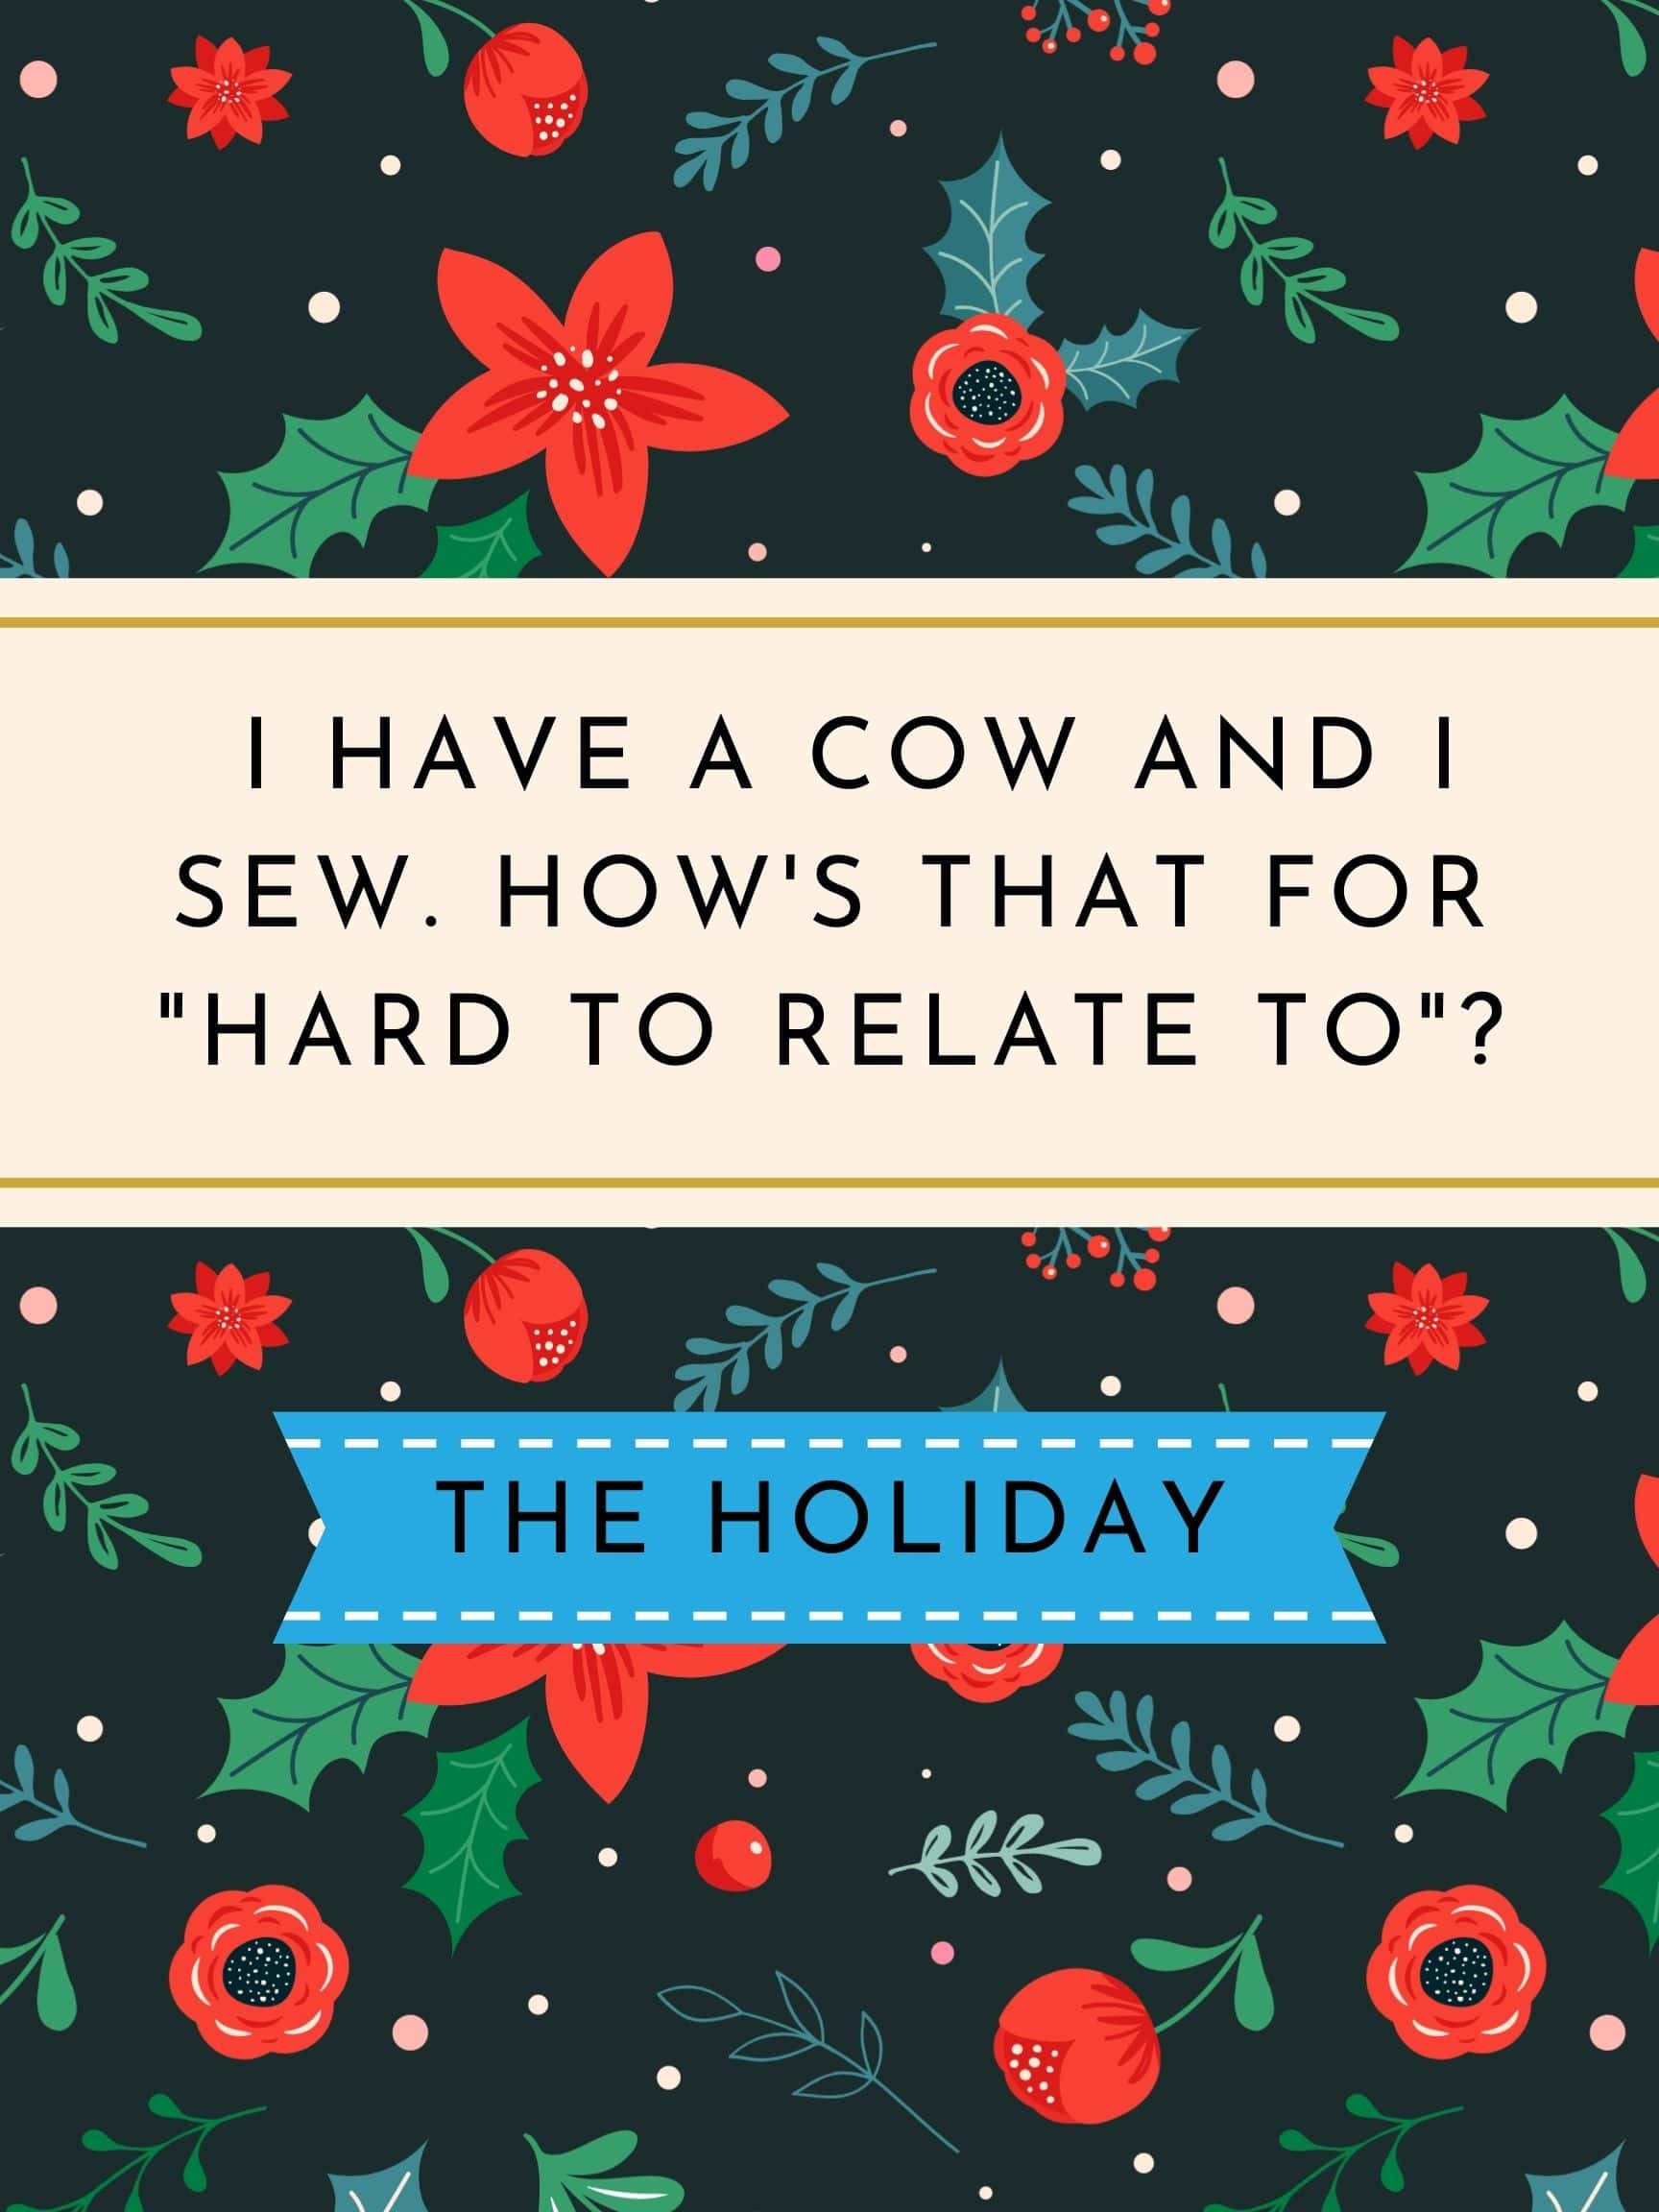 Funny Christmas Movie Quotes - I have a cow and I sew how that for hard to relate to the holiday